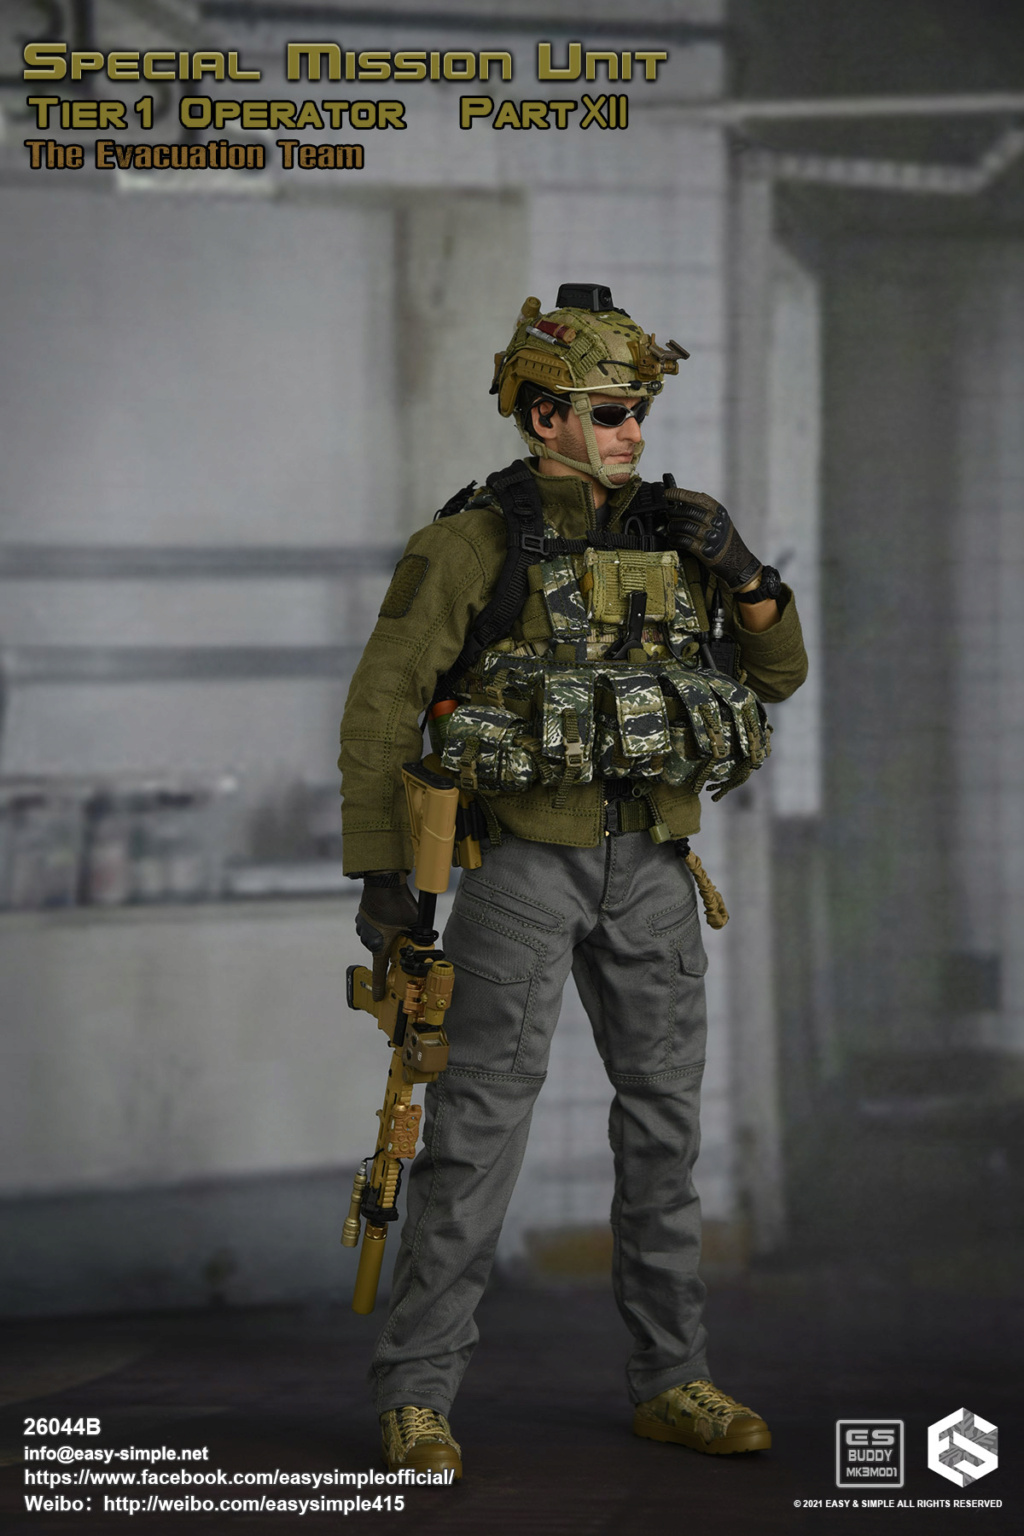 EvacuationTeam - NEW PRODUCT: Easy&Simple: 26044B Special Mission Unit Tier1 Operator Part XII The Evacuation Team 77220f10